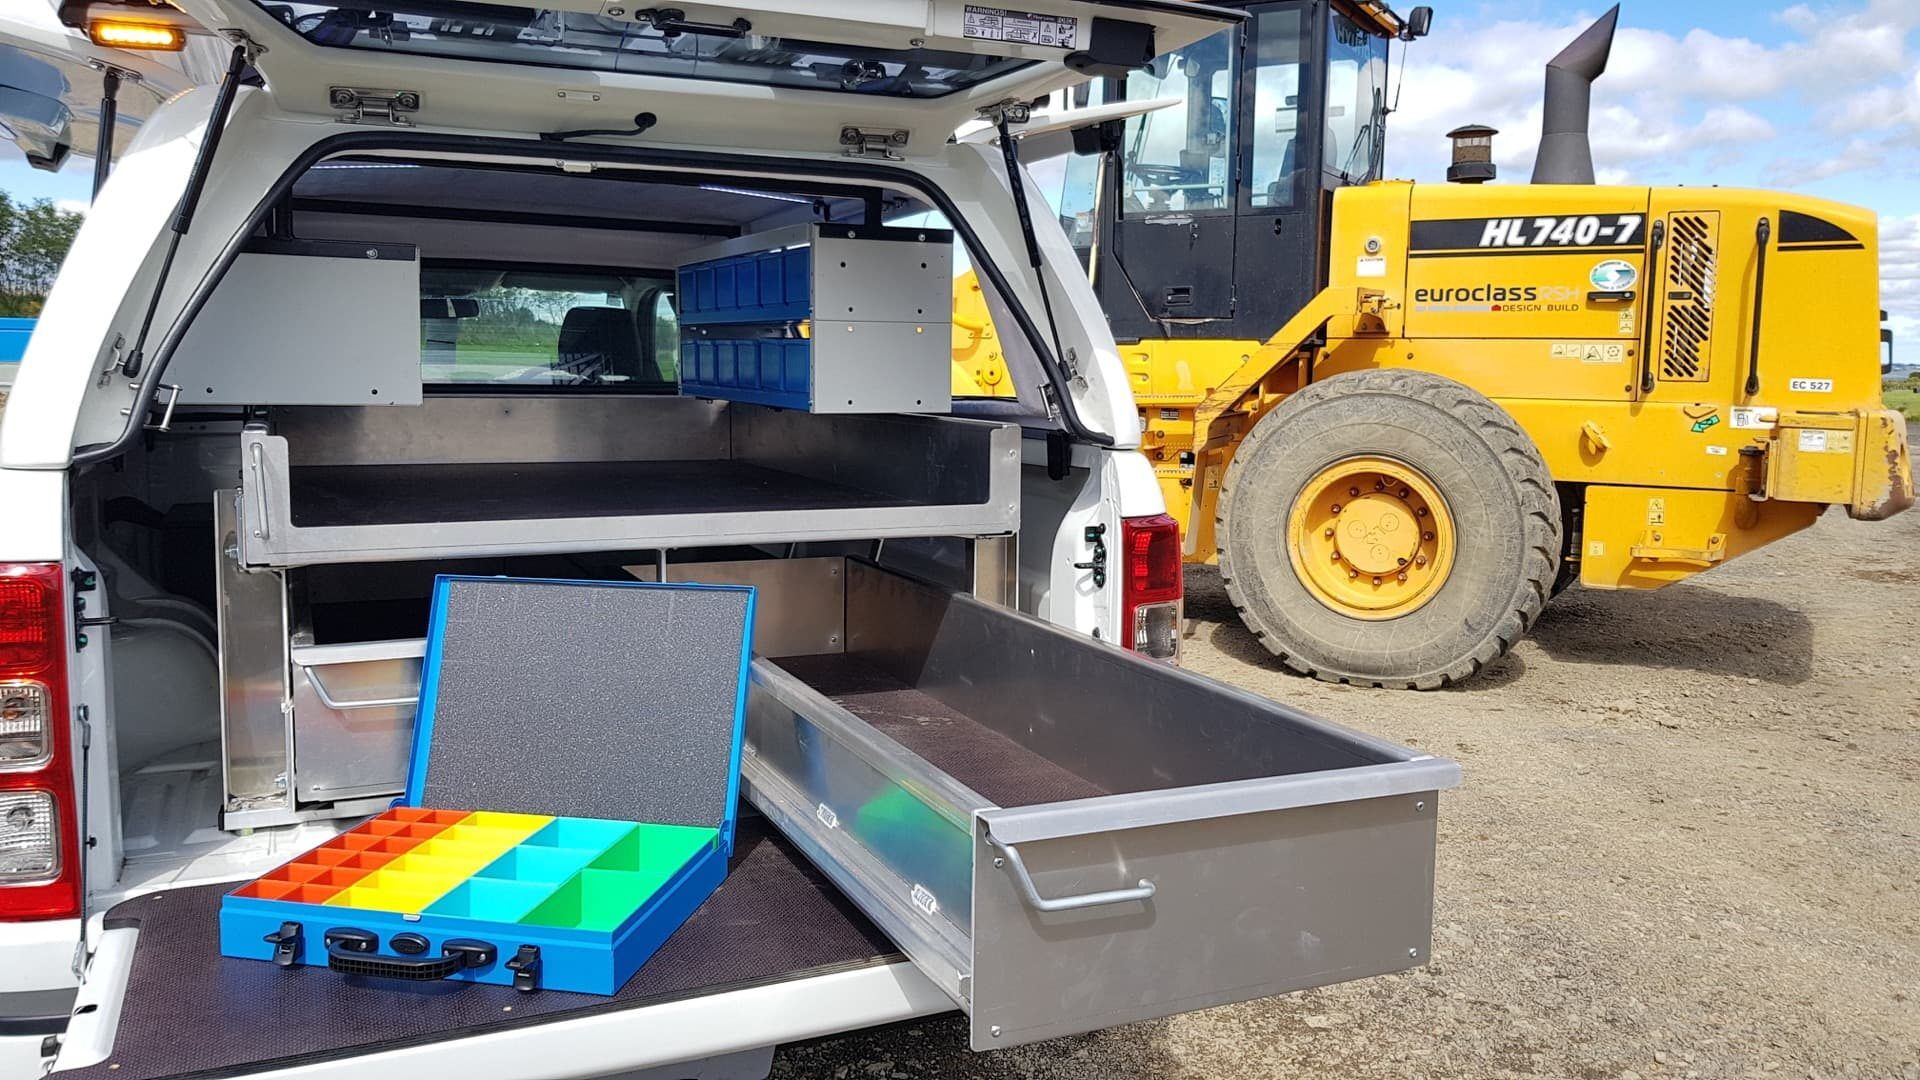 Tool box and sliding tray for technicians ute